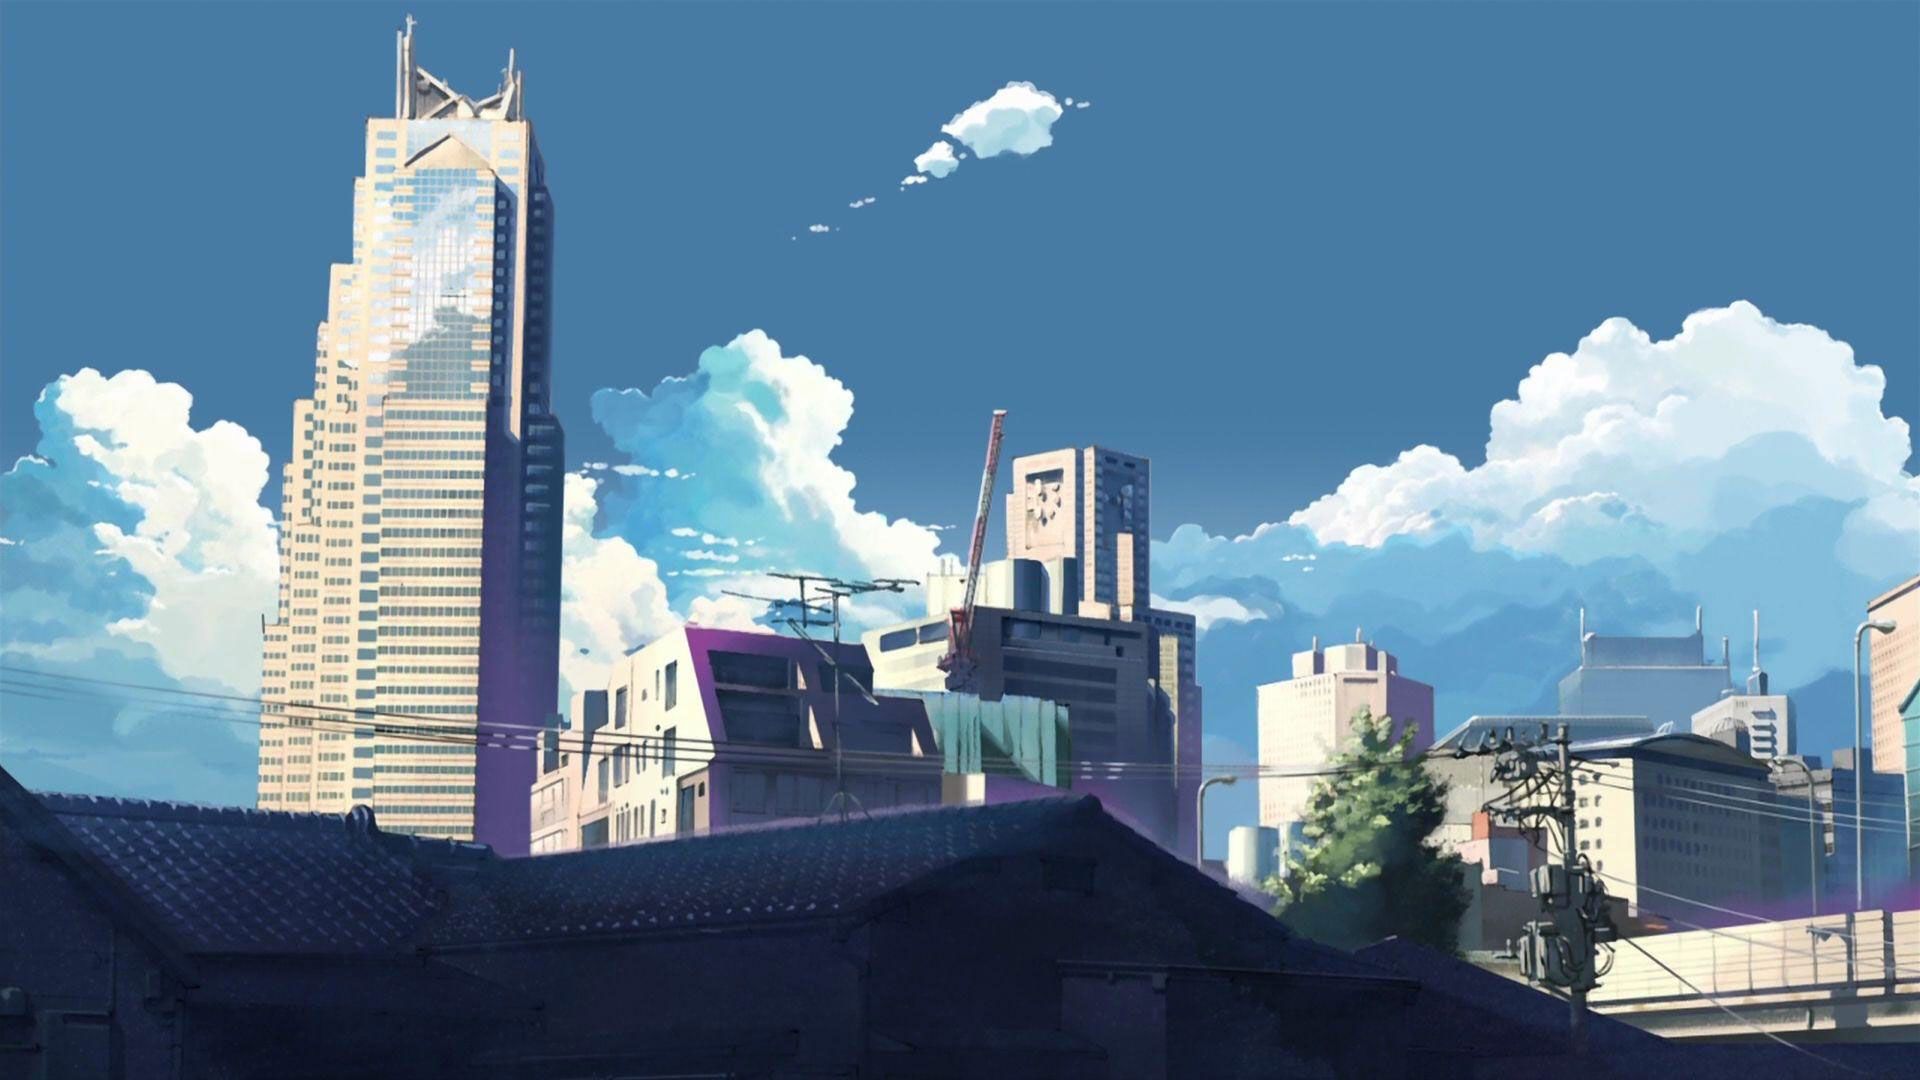 A city with tall buildings and clouds - Desktop, retro, 90s anime, cityscape, 1920x1080, anime, blue anime, anime city